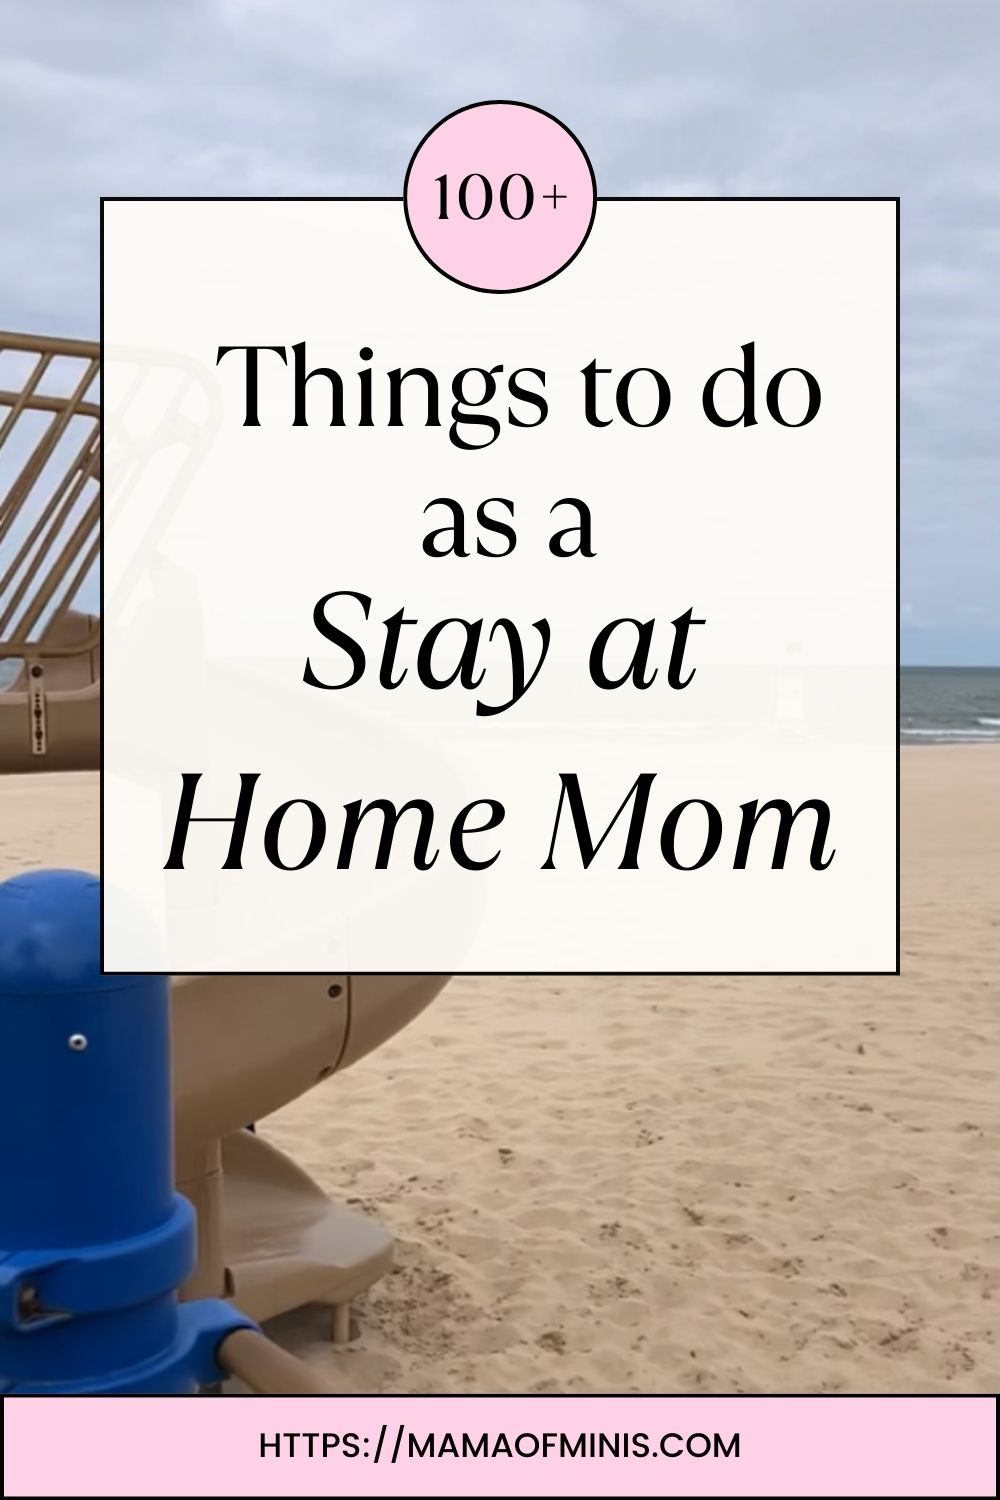 100 + Things to do as a Stay at home mom